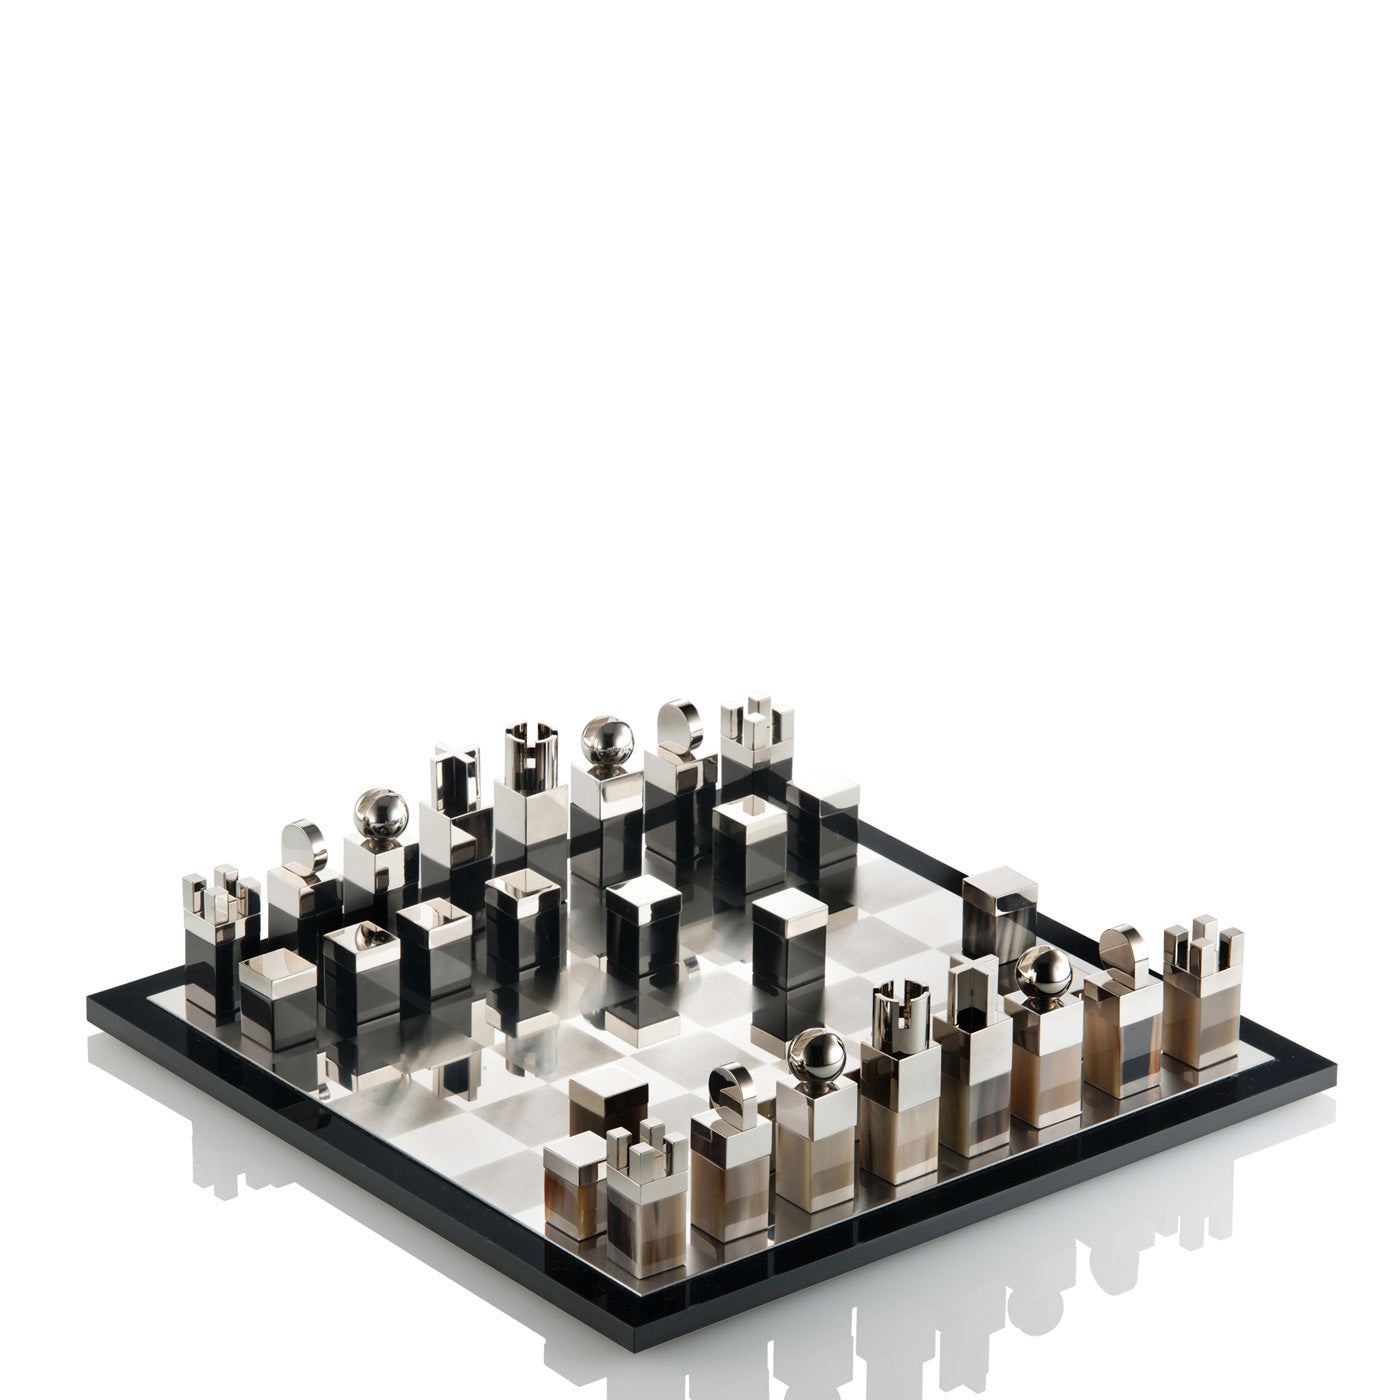 Arcahorn Nelson Lacquered Black Gloss Finish Wood and Mirrored Glass Chessboard with Horn and Palladium Plated Brass Chessmen | Exquisite Craftsmanship and Elegant Design | Perfect for Discerning Chess Enthusiasts | Explore a Range of Luxury Board Games at 2Jour Concierge, #1 luxury high-end gift & lifestyle shop